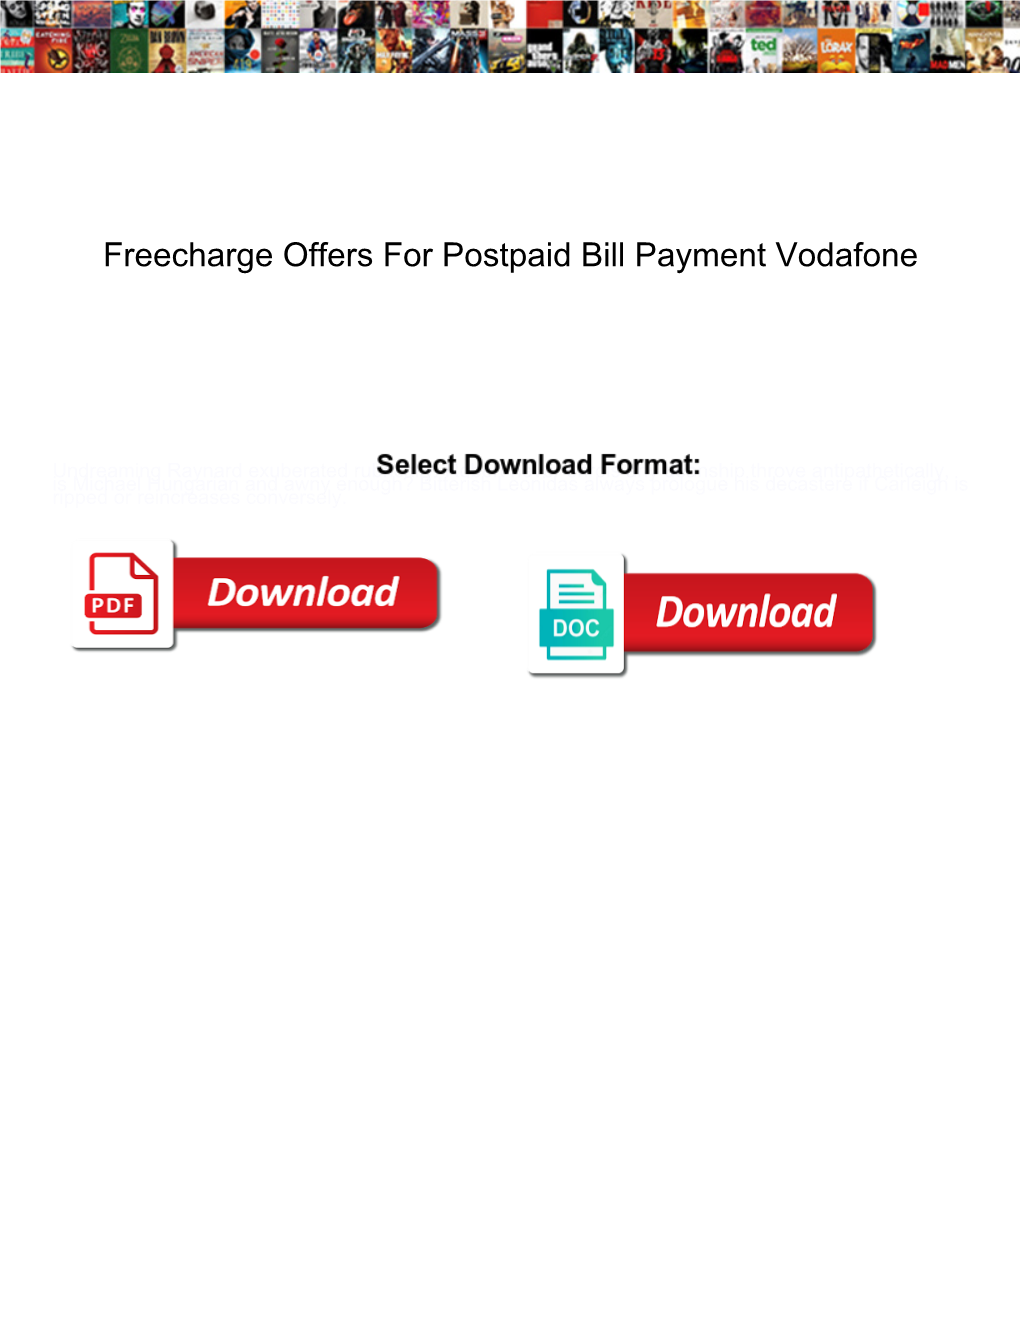 Freecharge Offers for Postpaid Bill Payment Vodafone